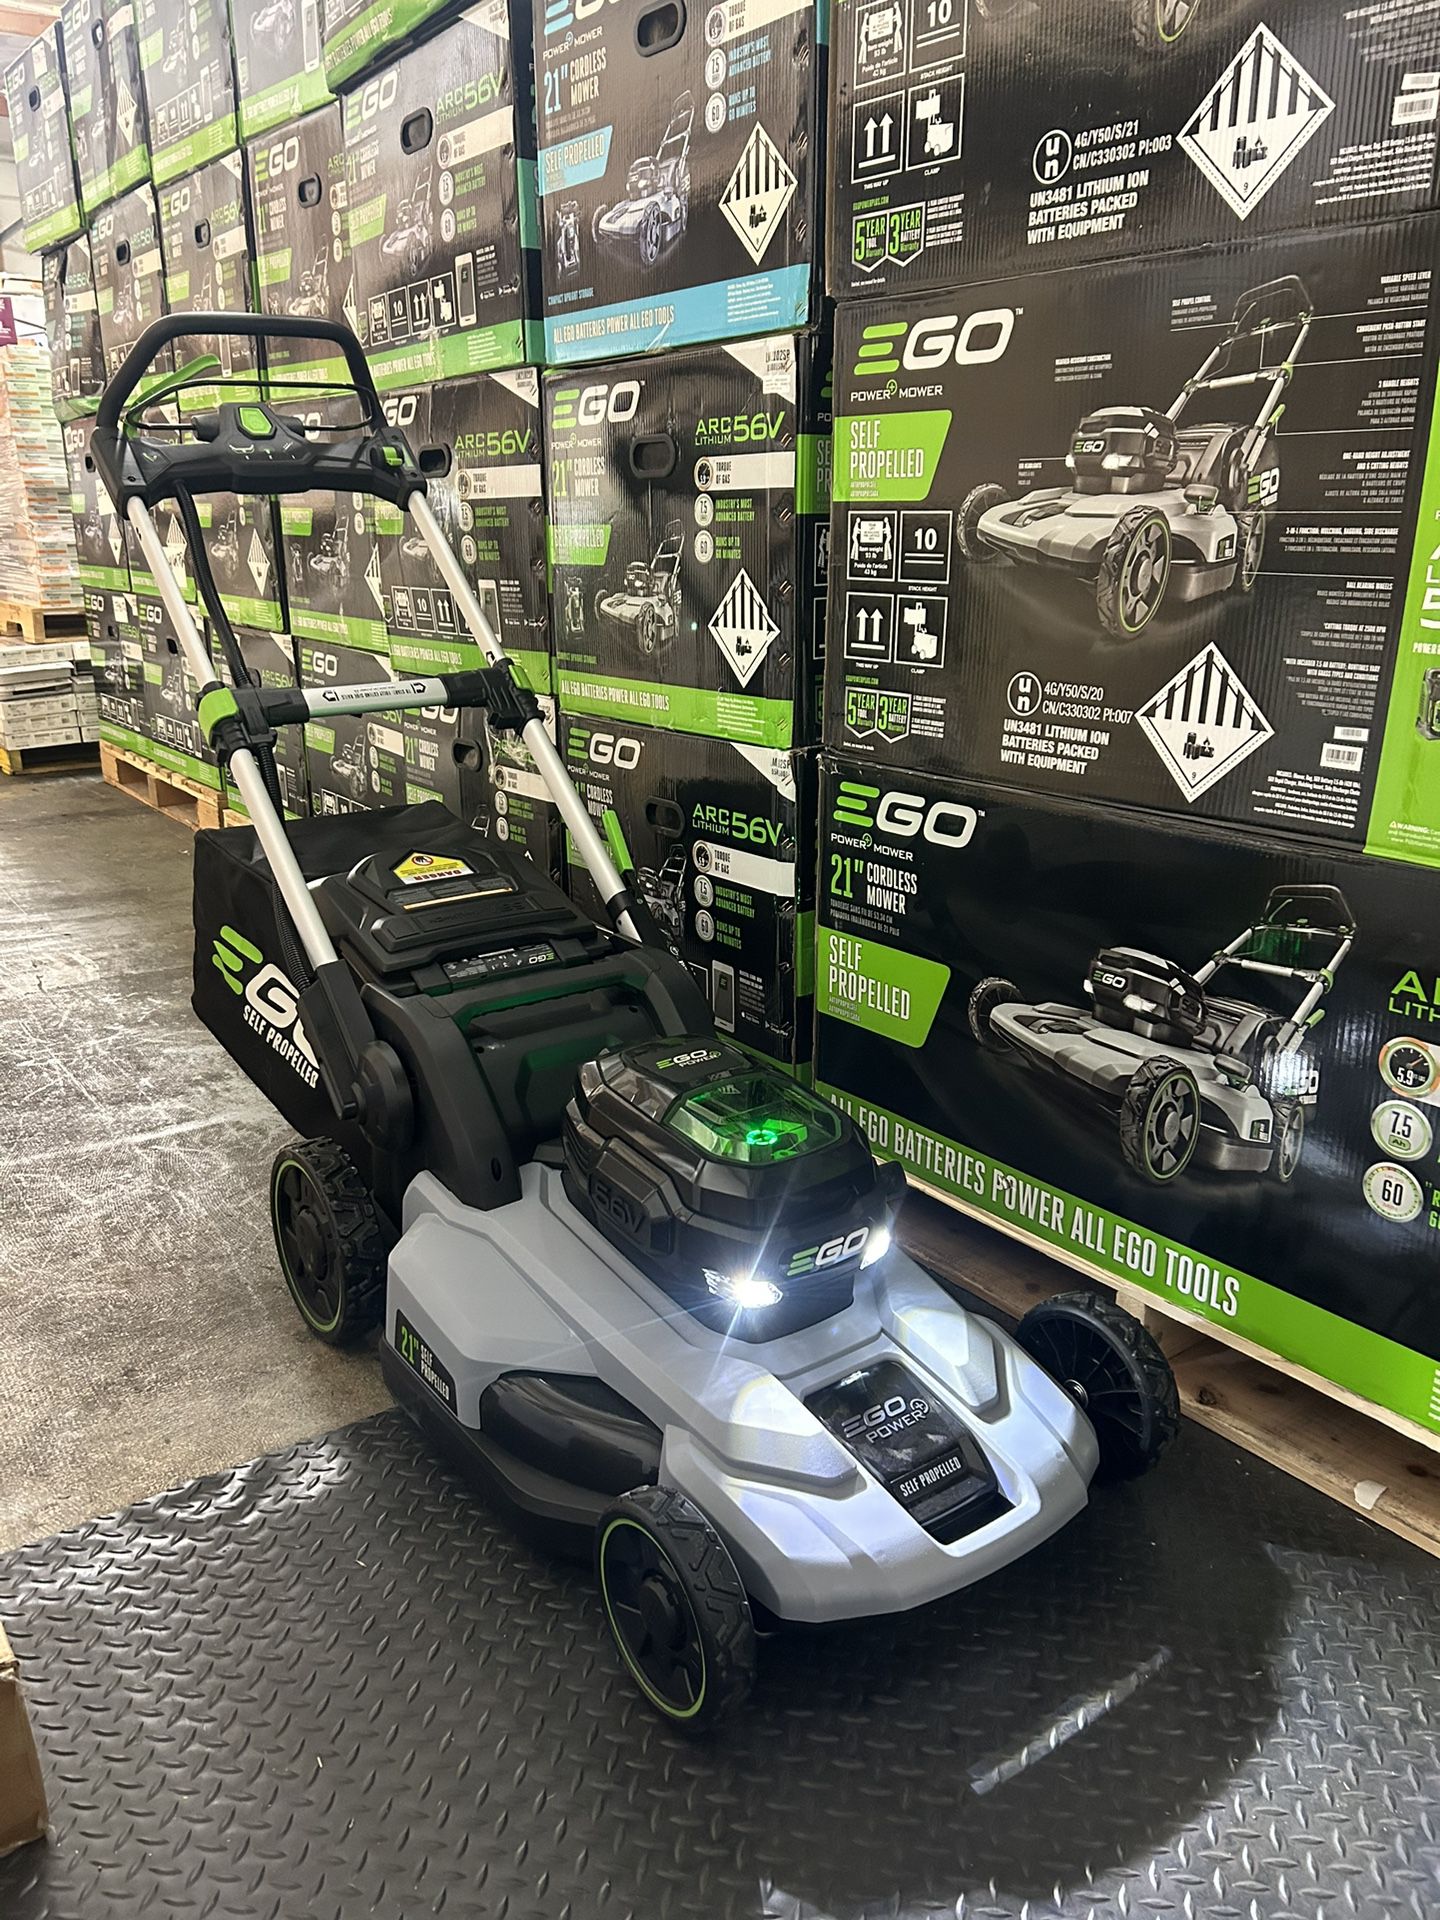 EGO Self Propelled Lawn Mower LM2100SP Brand New Try Before You Buy Retail $500